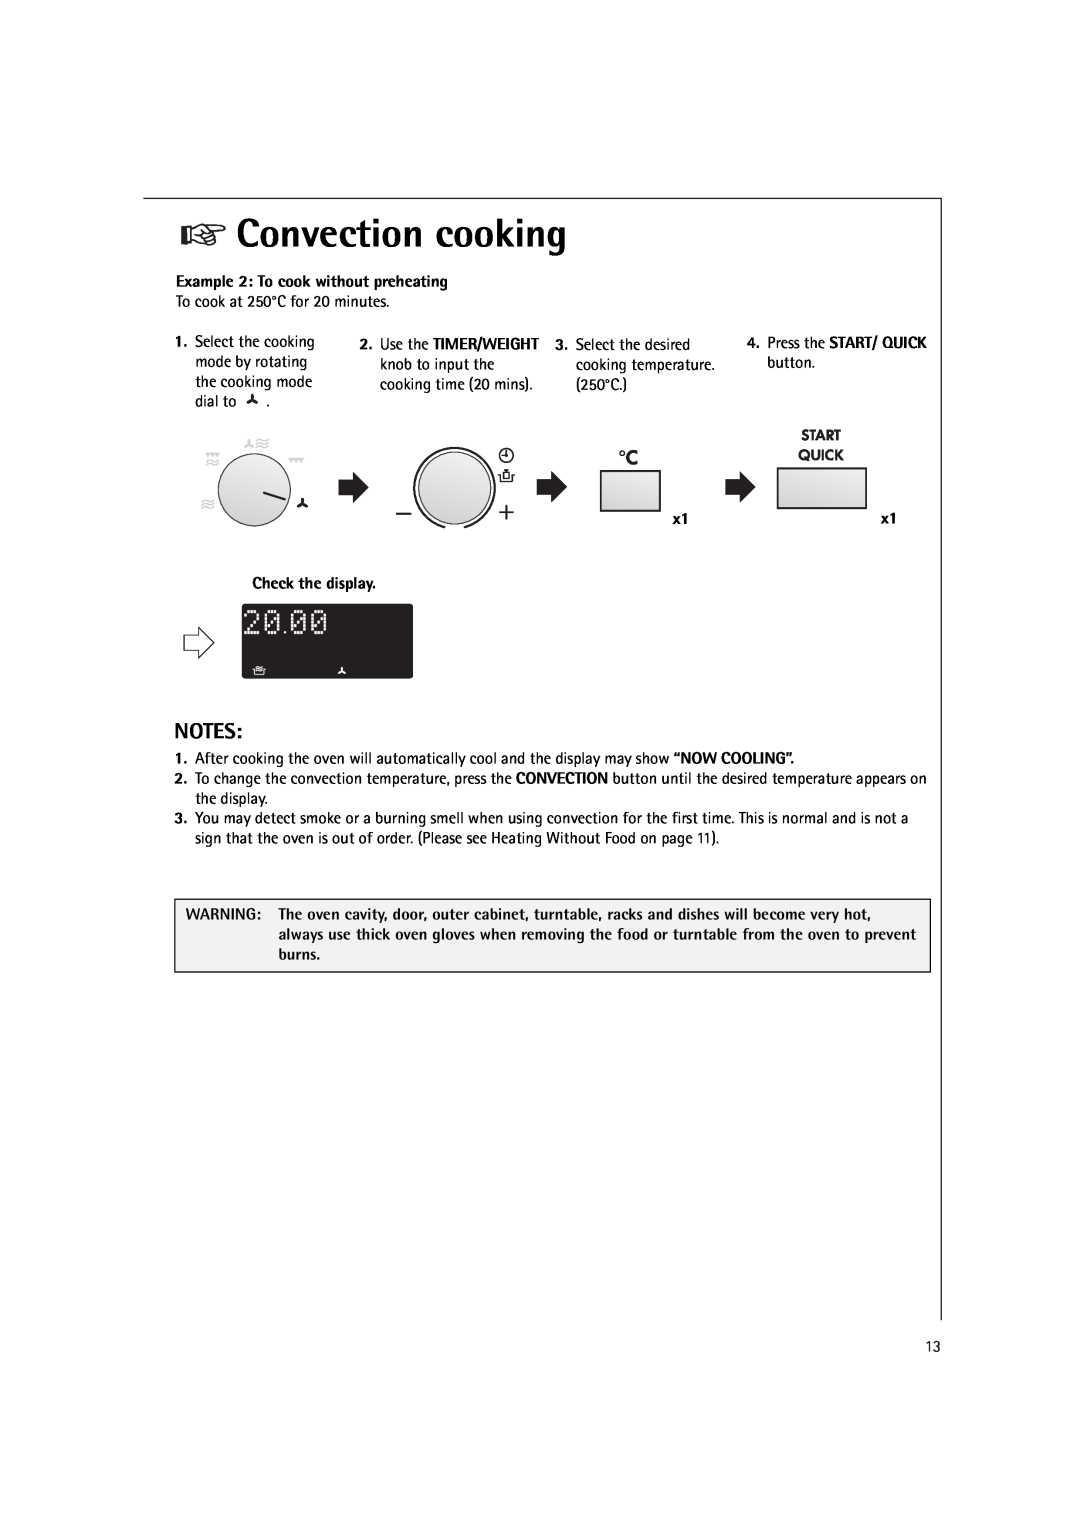 Electrolux MCC4060E Convection cooking, Example 2 To cook without preheating, Use the TIMER/WEIGHT, x1 Check the display 